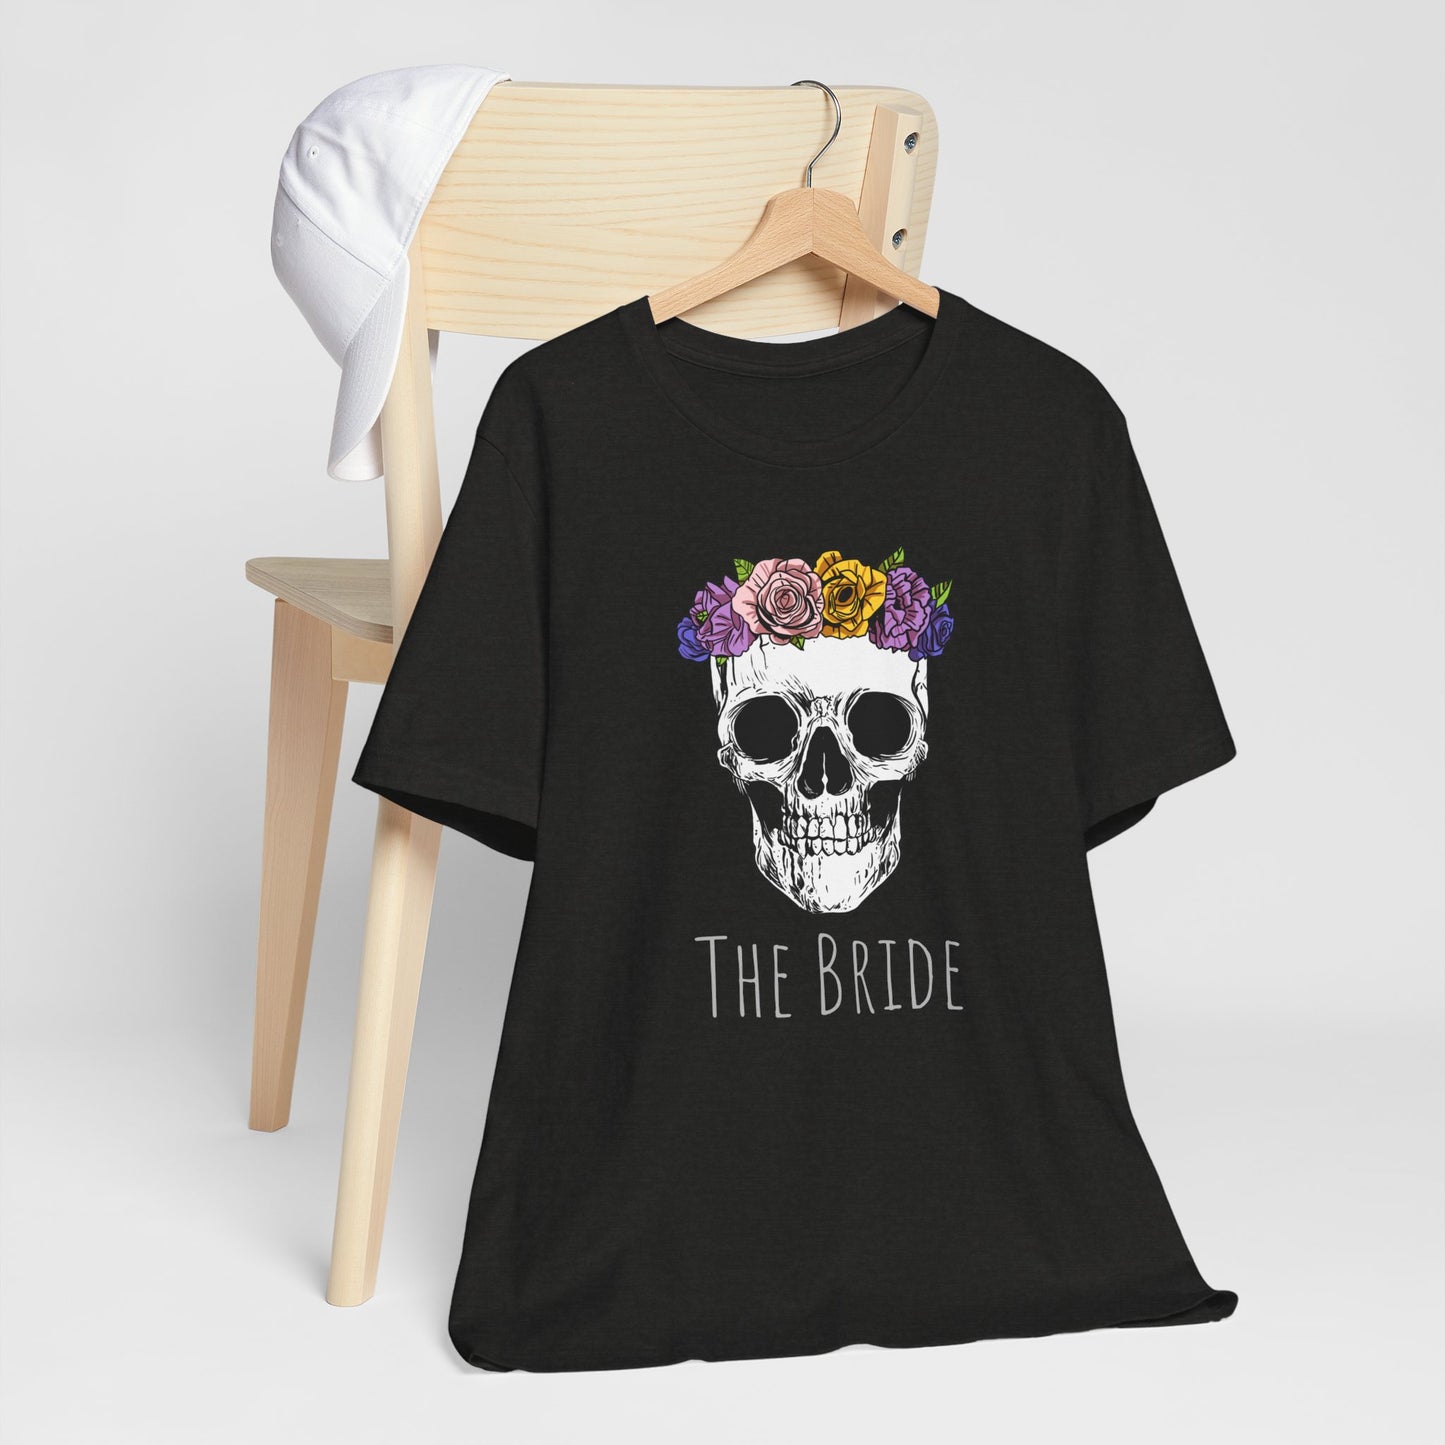 The Bride And The Groom Matching Couples Shirts T-Shirt Brides by Emilia Milan 